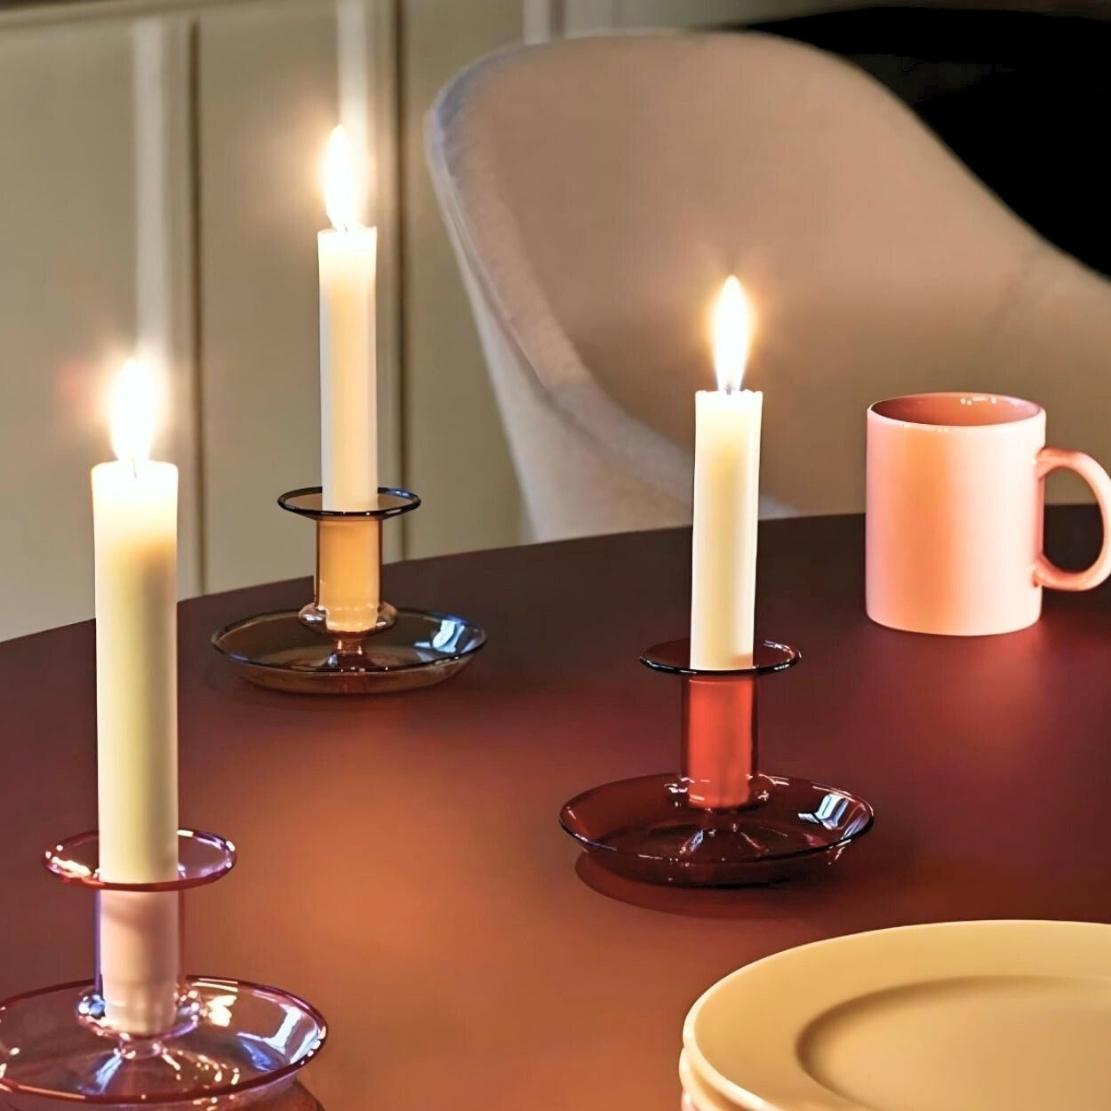 Simple glass candlestick holders with glowing candles